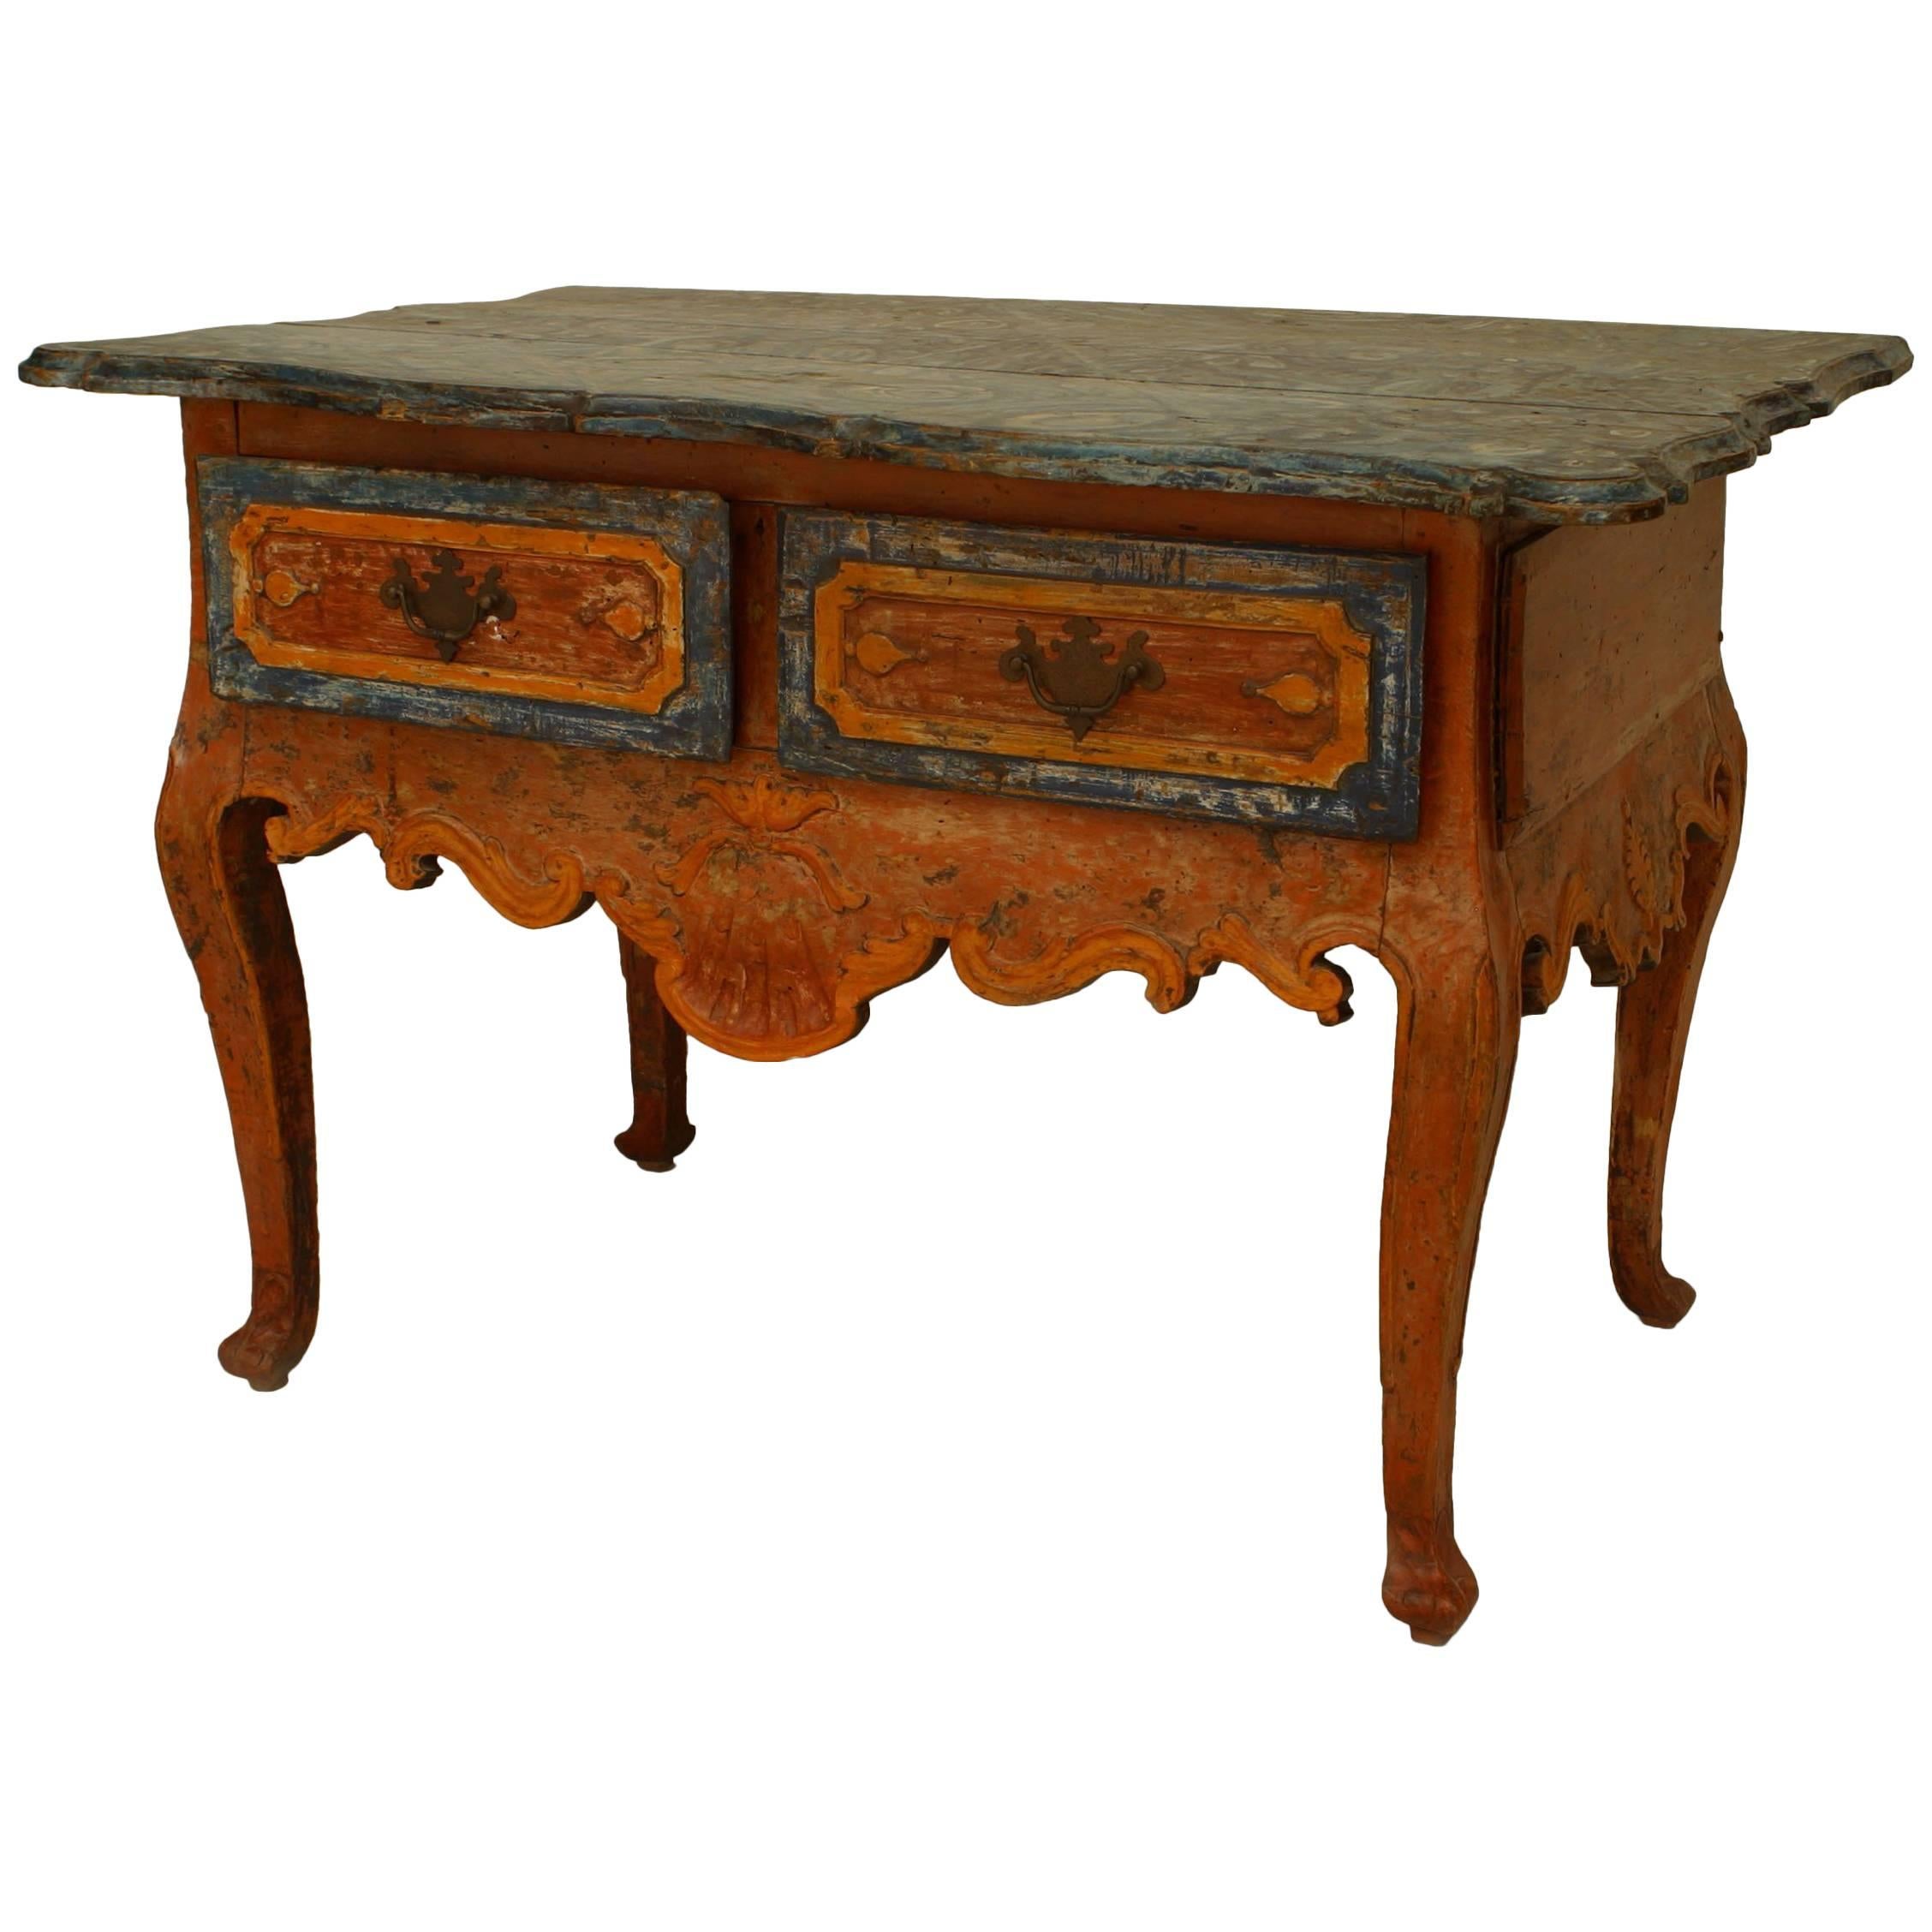 Rustic Continental ‘Portuguese’ 18th Century Orange and Blue Painted Commode